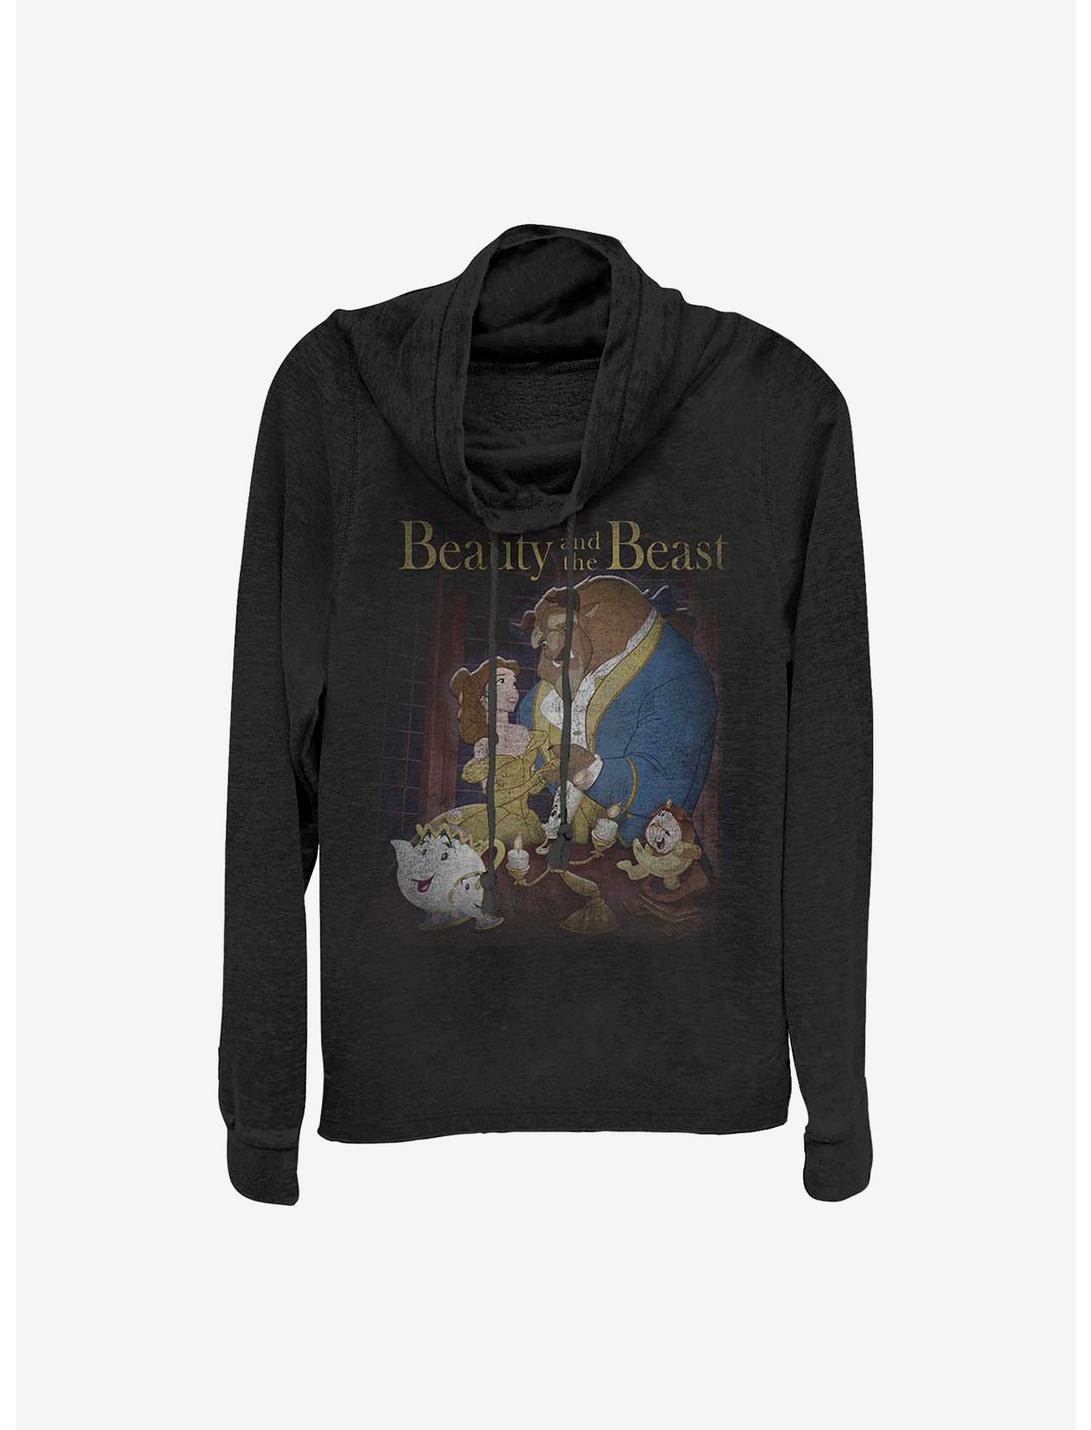 Disney Beauty And The Beast Poster Cowlneck Long-Sleeve Girls Top, BLACK, hi-res